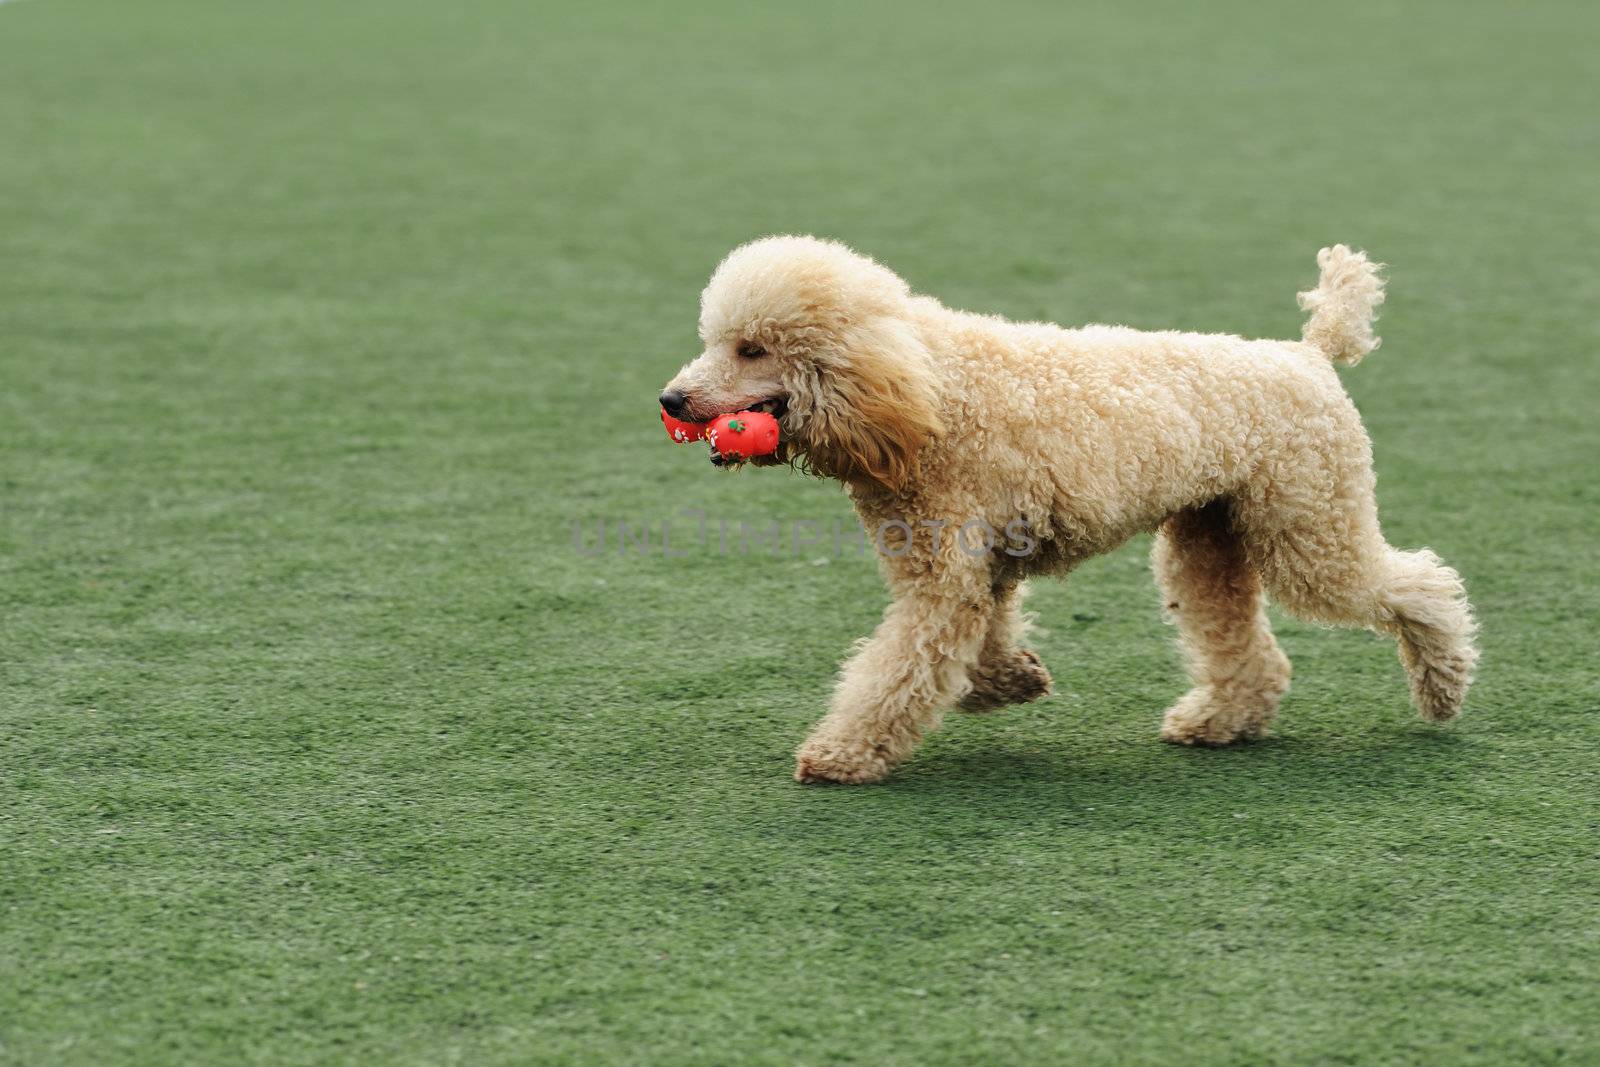 Lovely Poodle dog holding a toy in the mouth and running on the playground